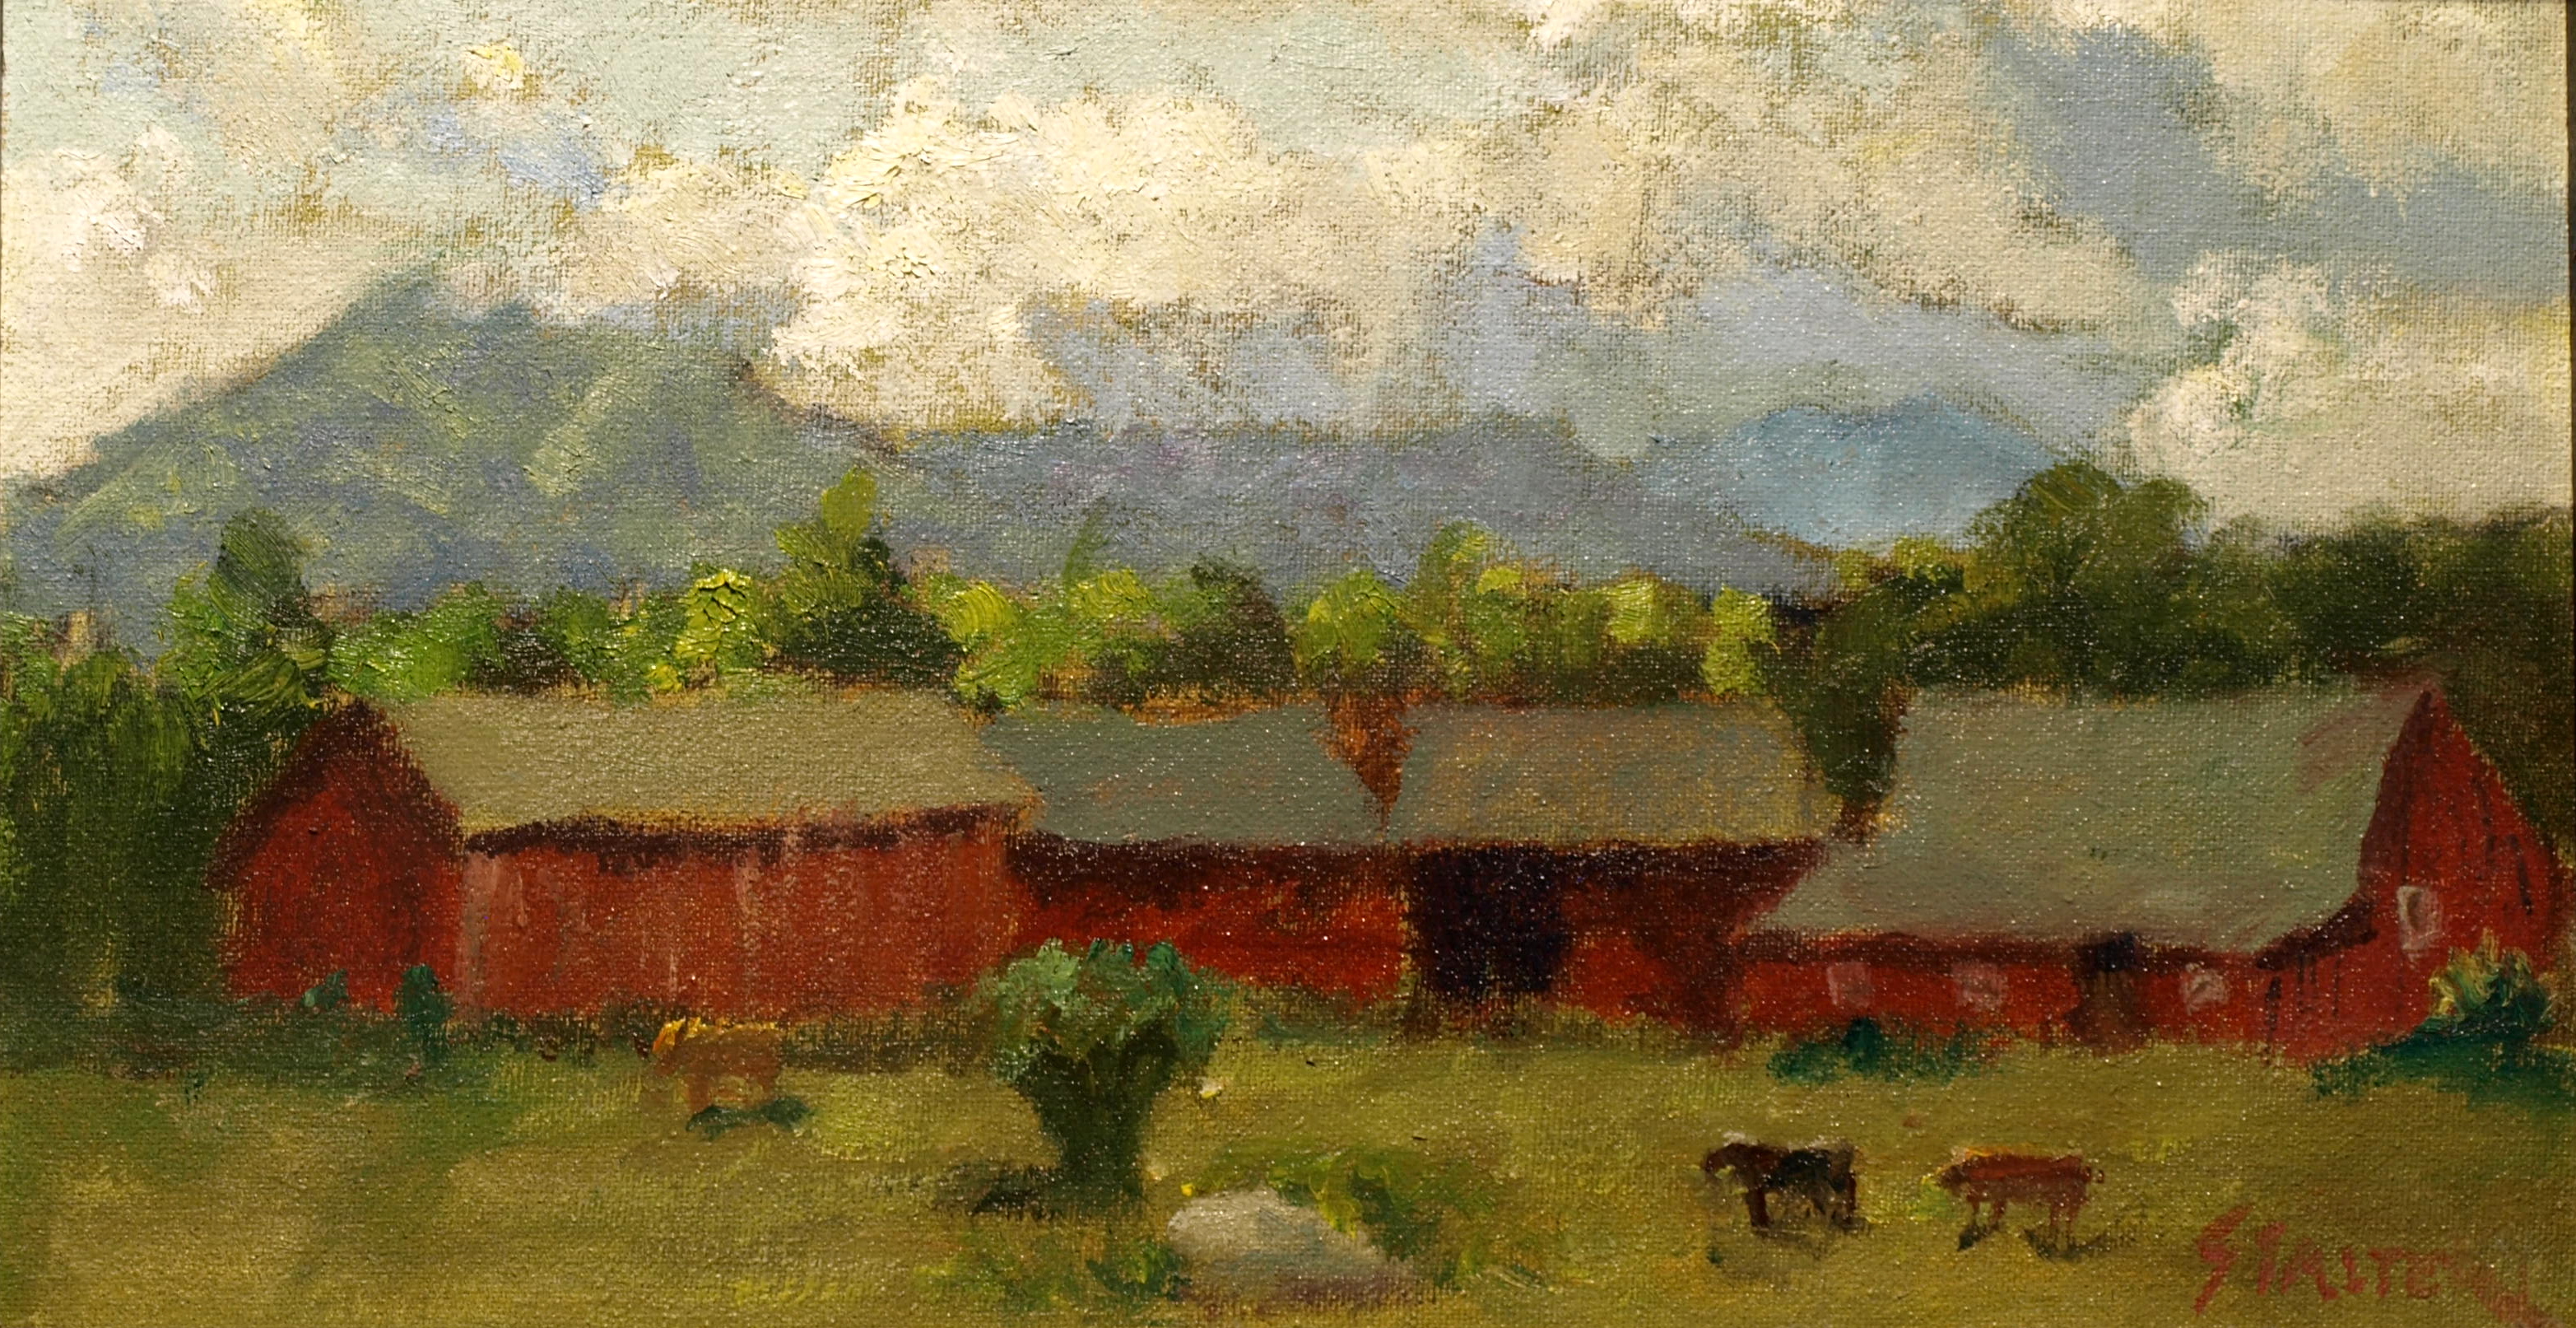 Bill Newton's Cows, Oil on Canvas on Panel, 8 x 14 Inches, by Richard Stalter, $225